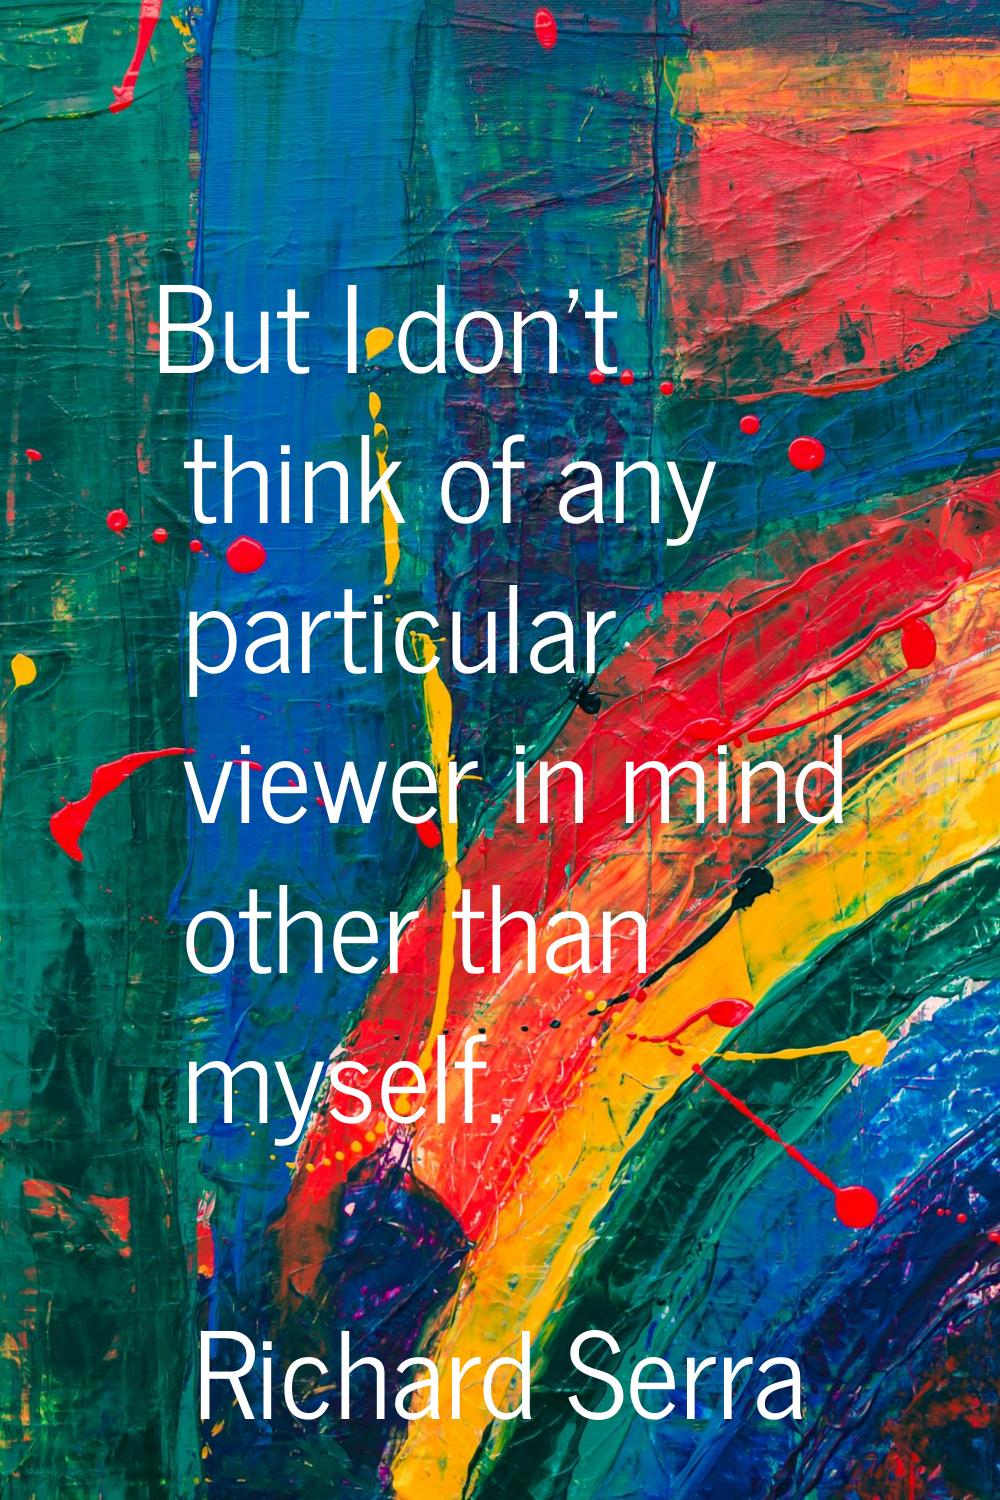 But I don't think of any particular viewer in mind other than myself.